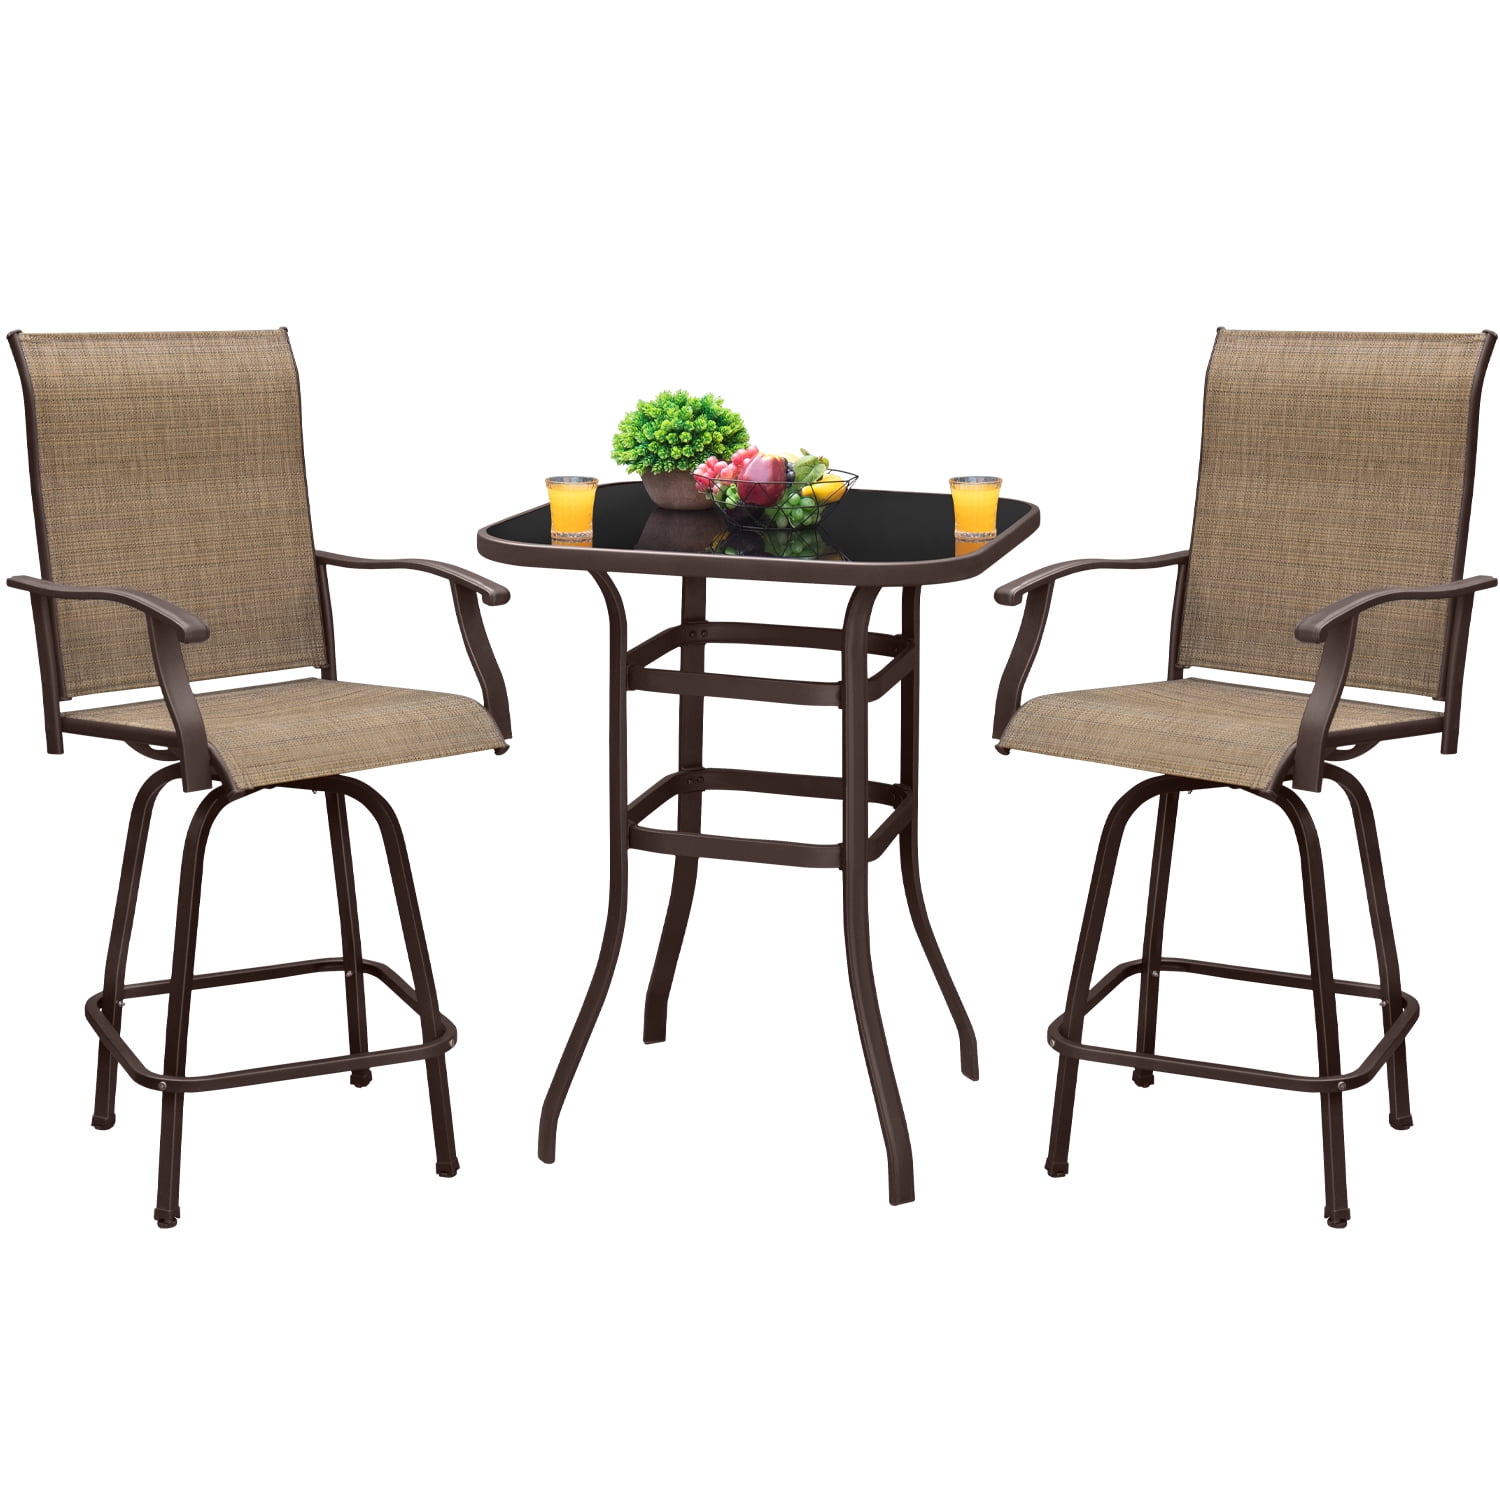 Lacoo Patio Bar Height Bistro Chair And, Bar Height Outdoor Chairs And Table